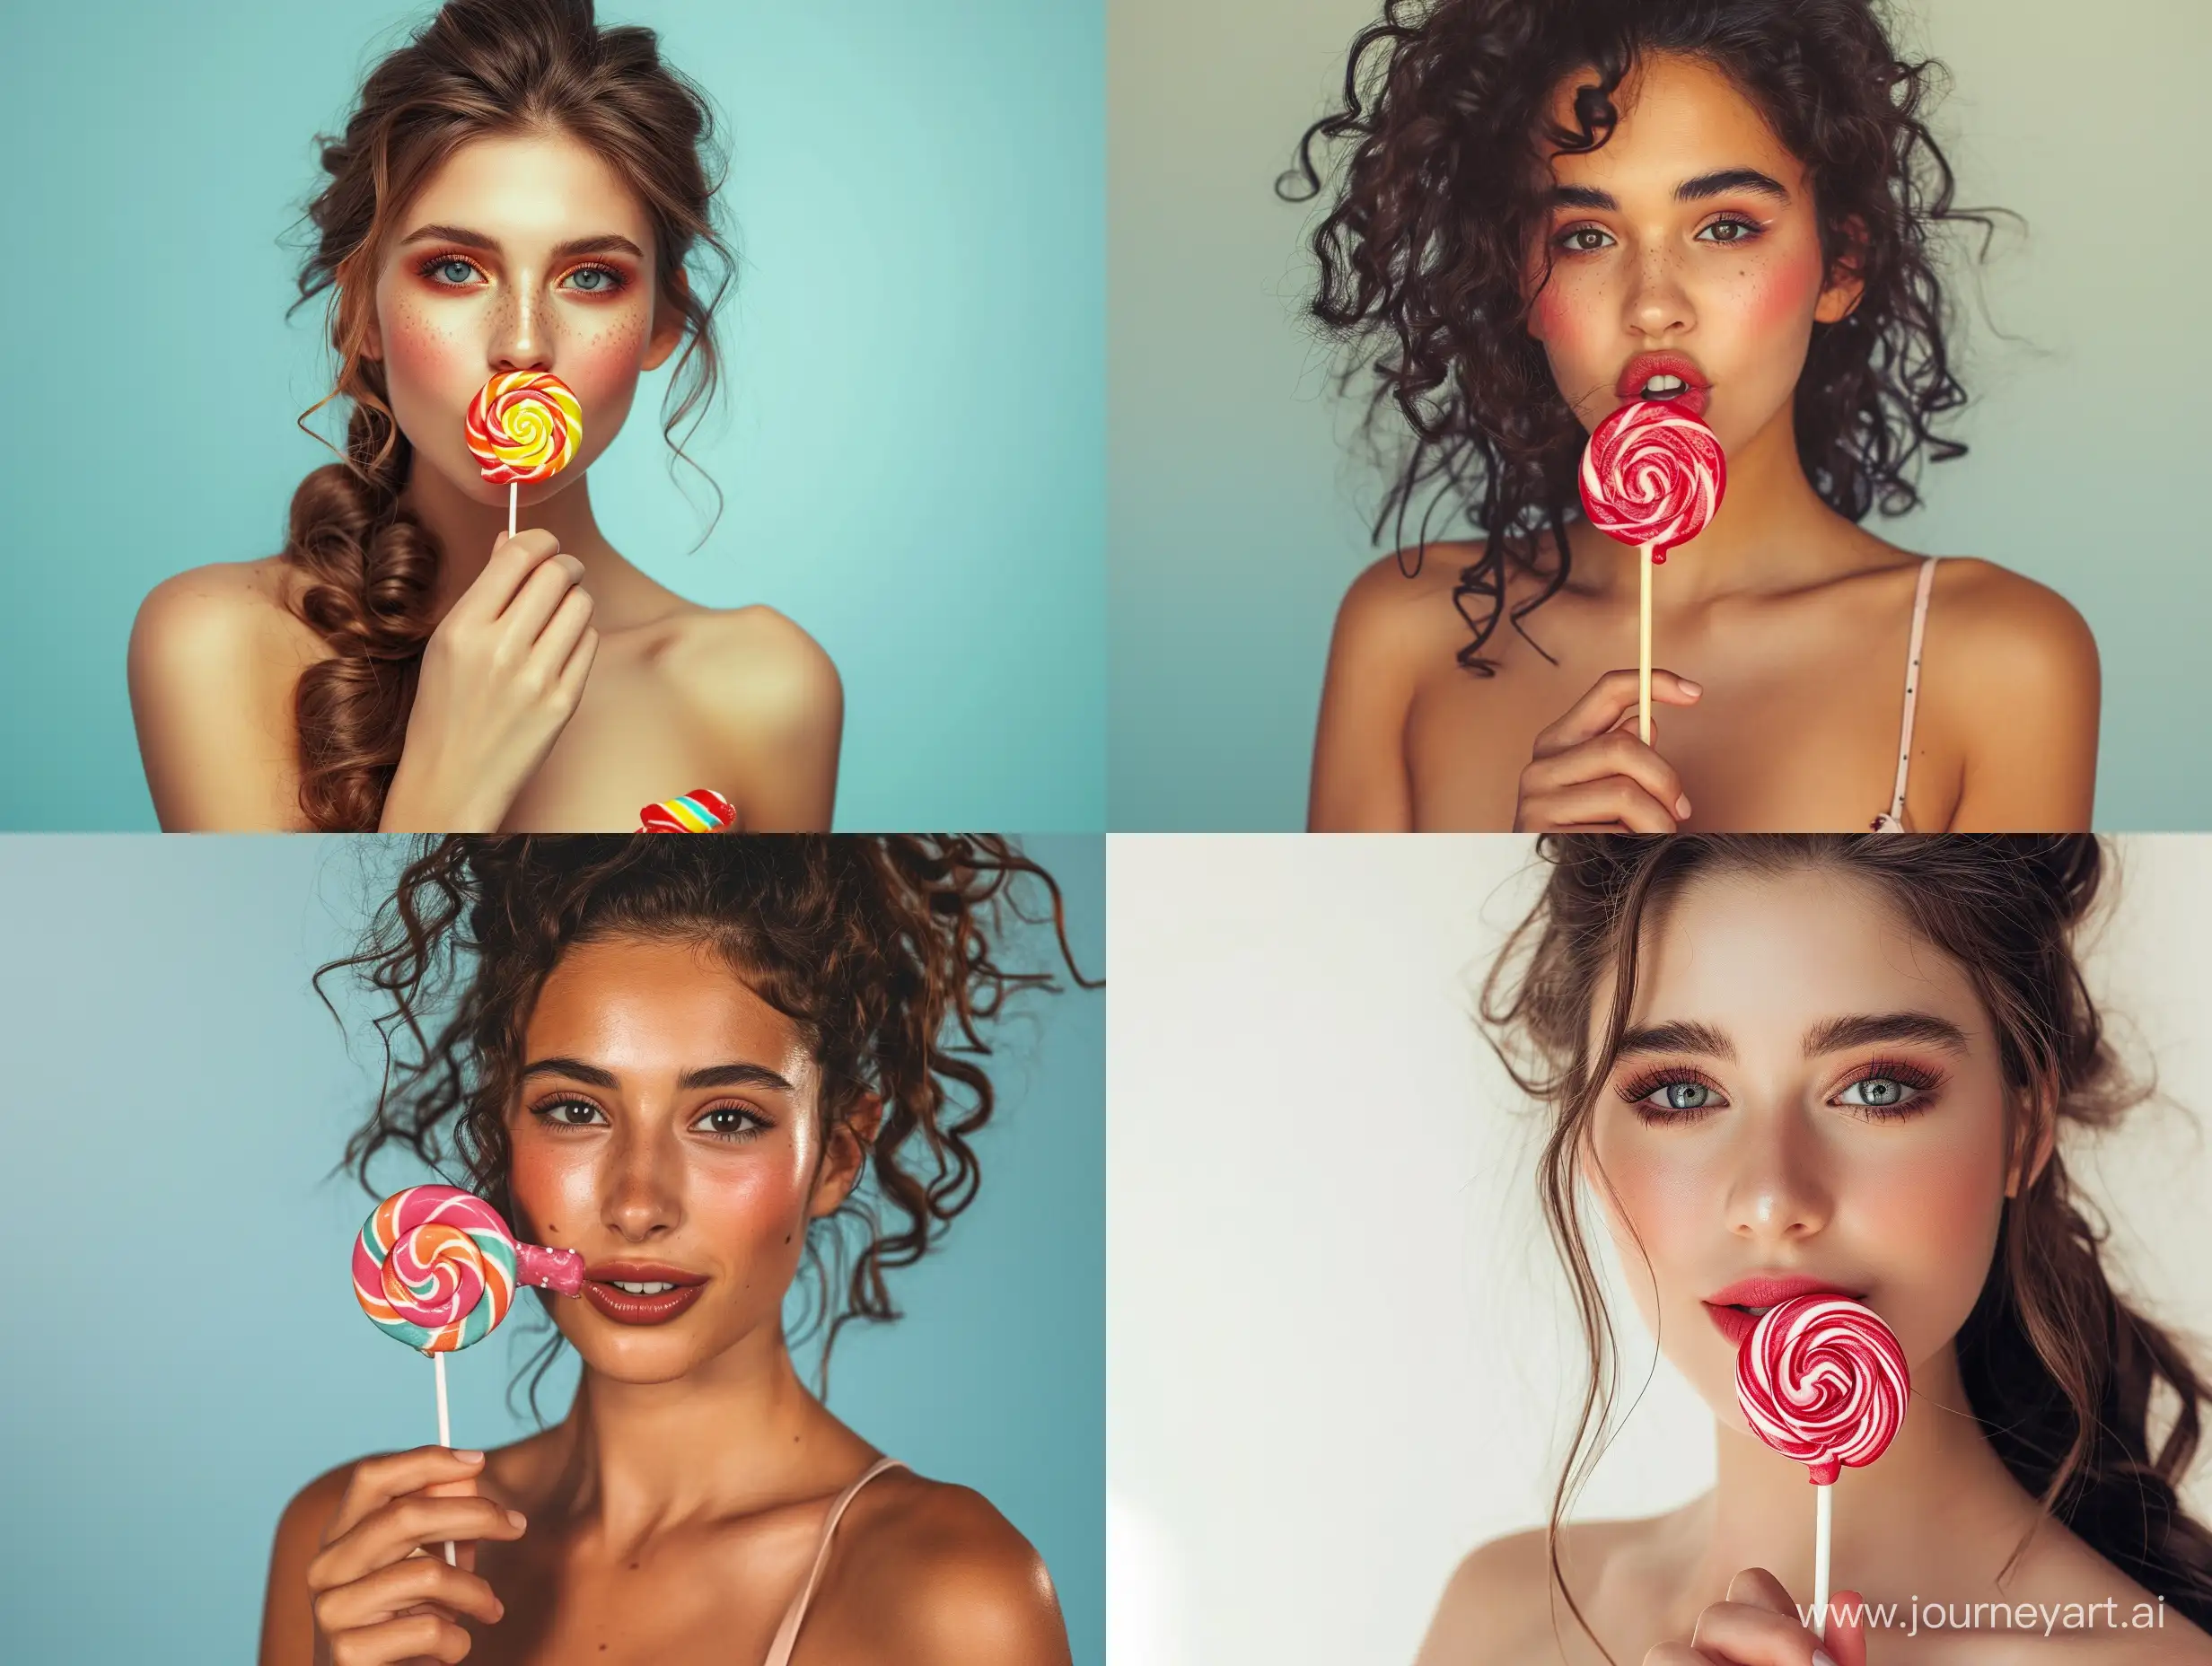 Elegant-Young-Woman-Enjoying-a-Lollipop-with-Grace-and-Style